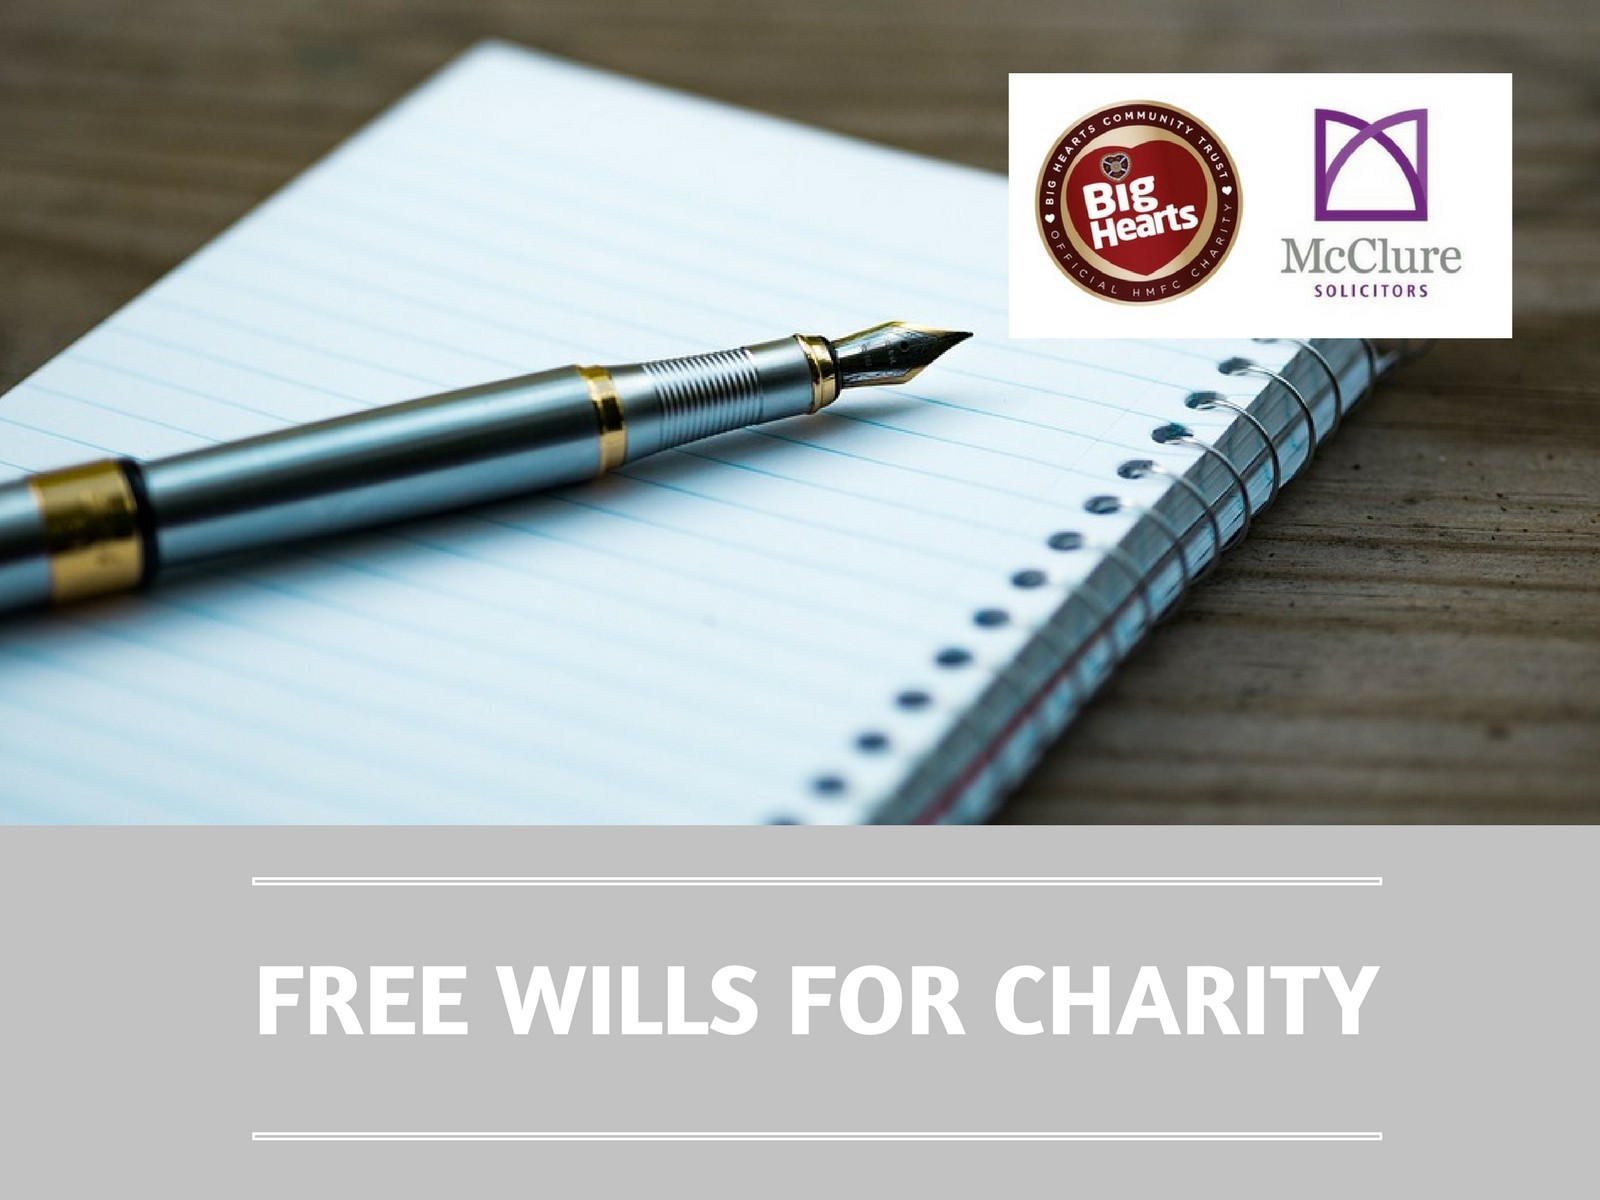  » New fundraising partnership to provide ‘Free wills for charity’